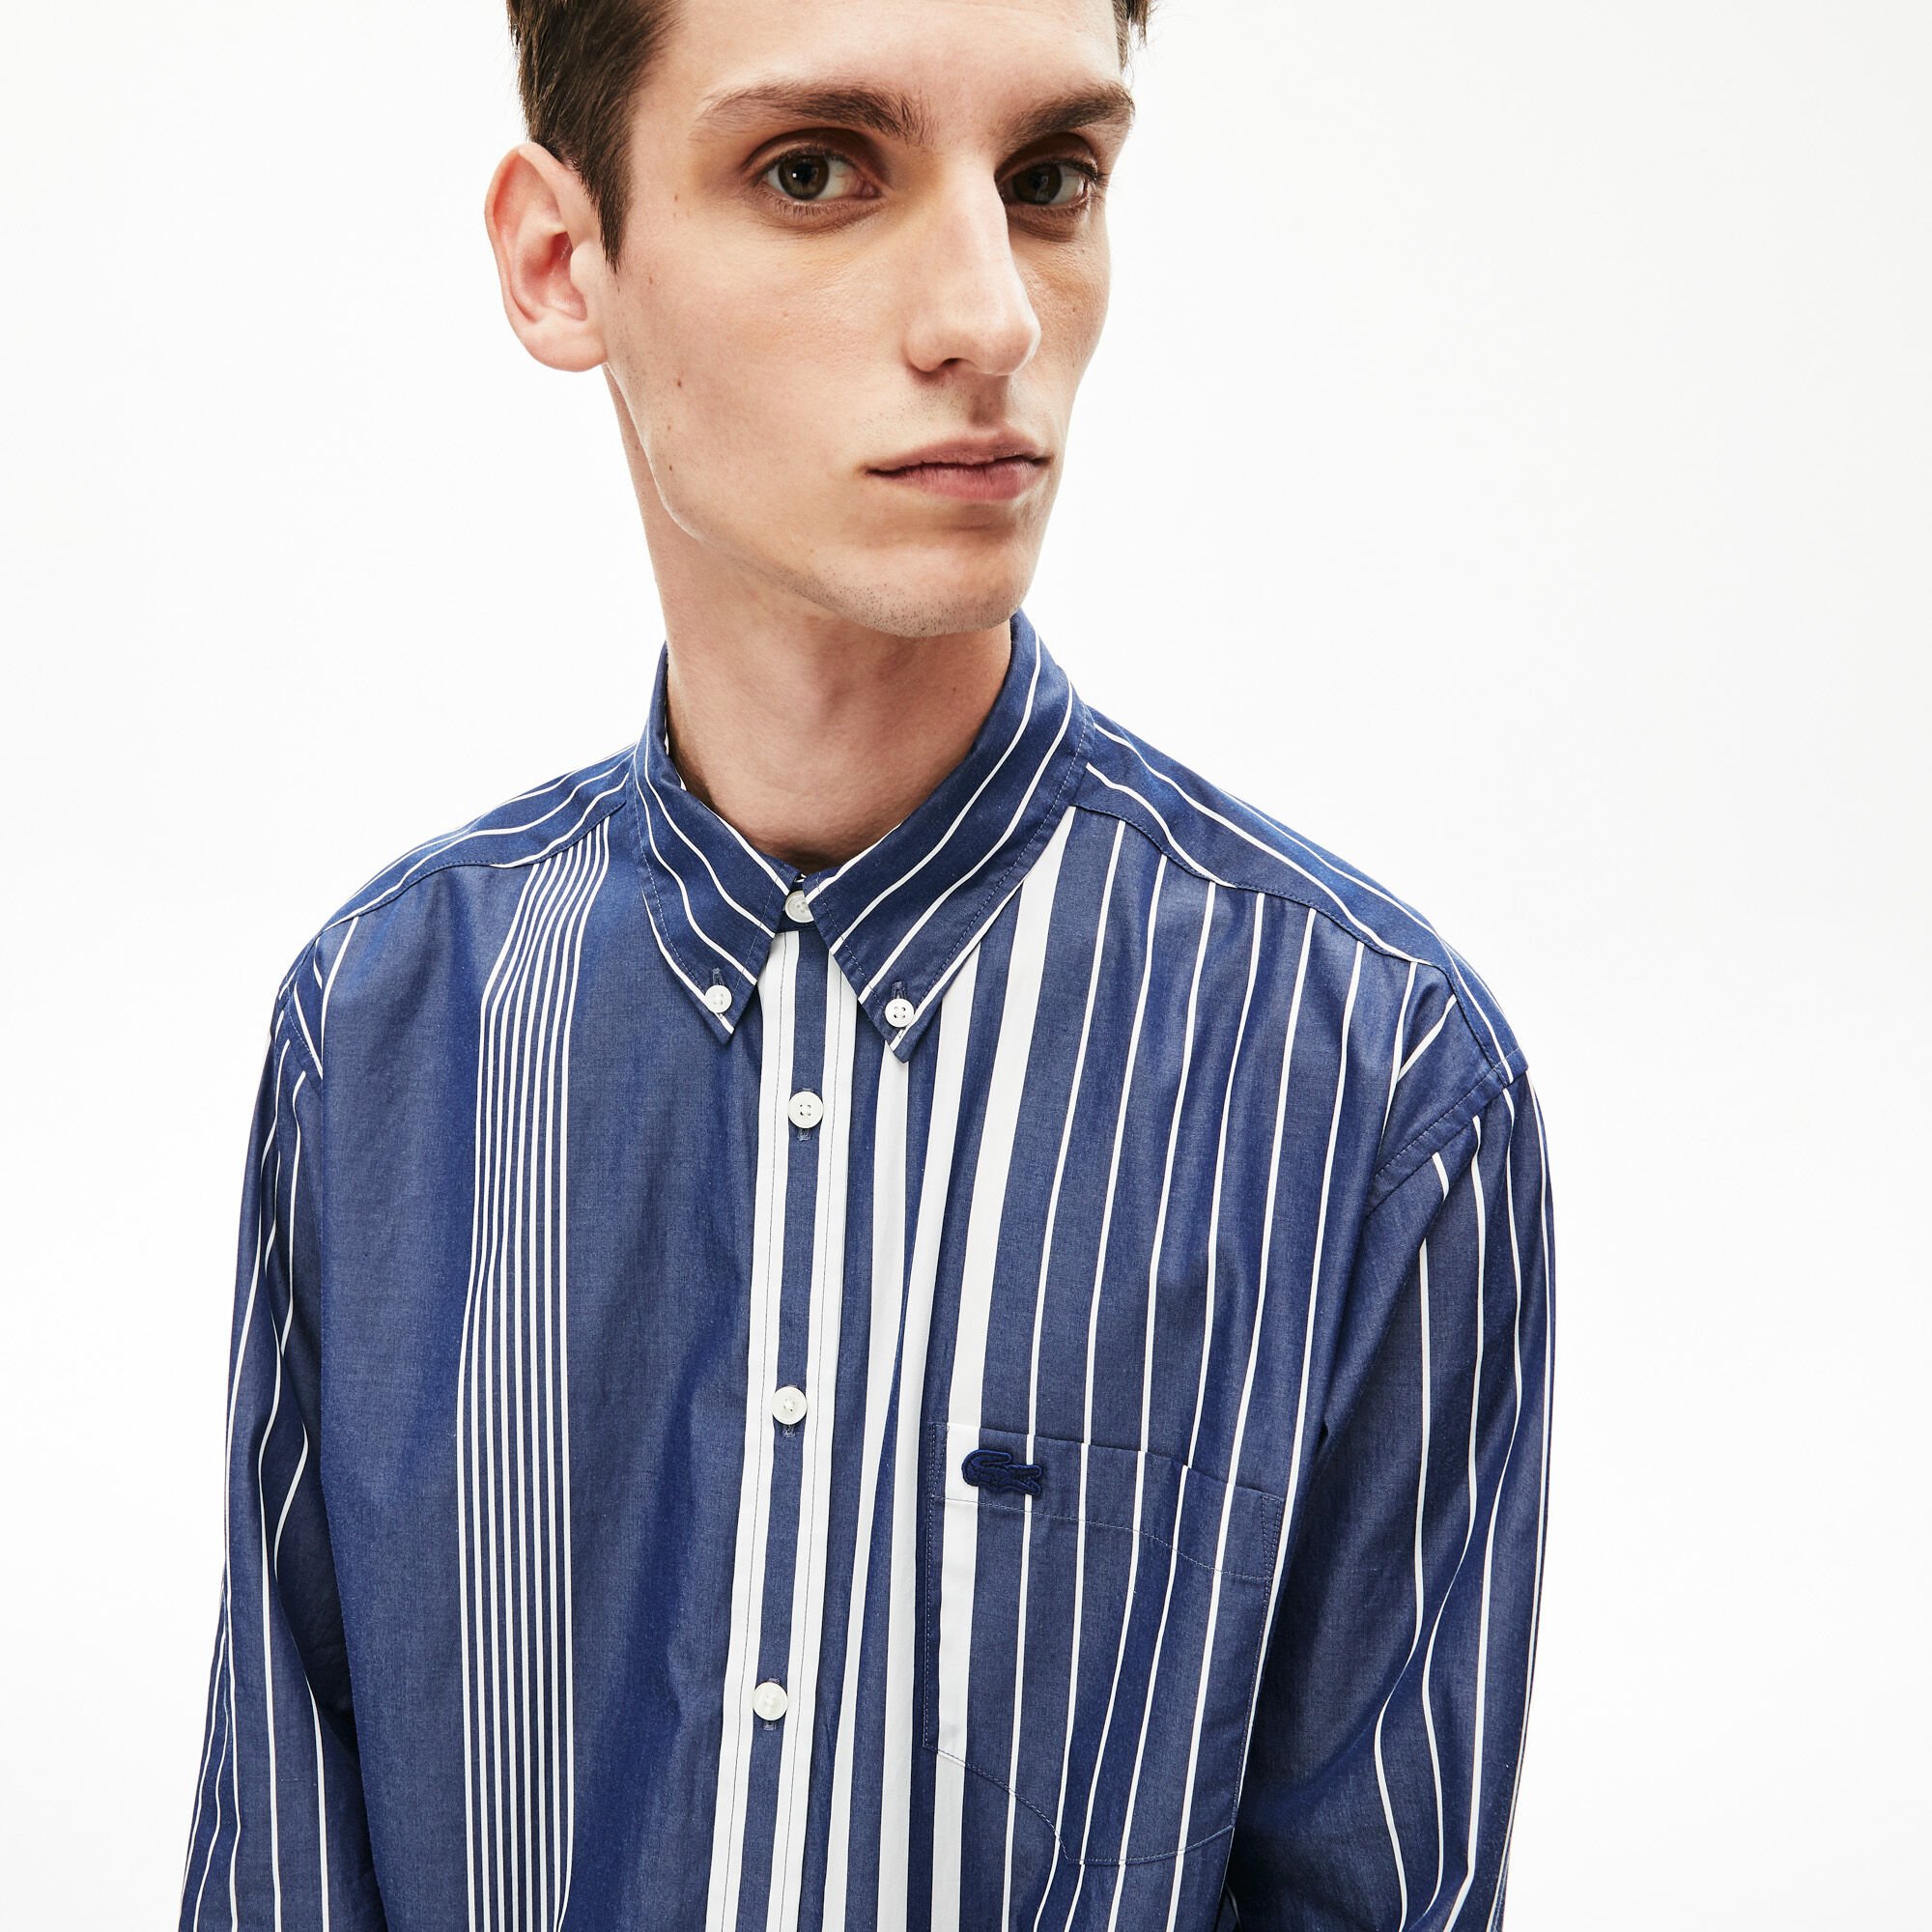 Men's Mismatched Striped Relaxed Fit Cotton Shirt